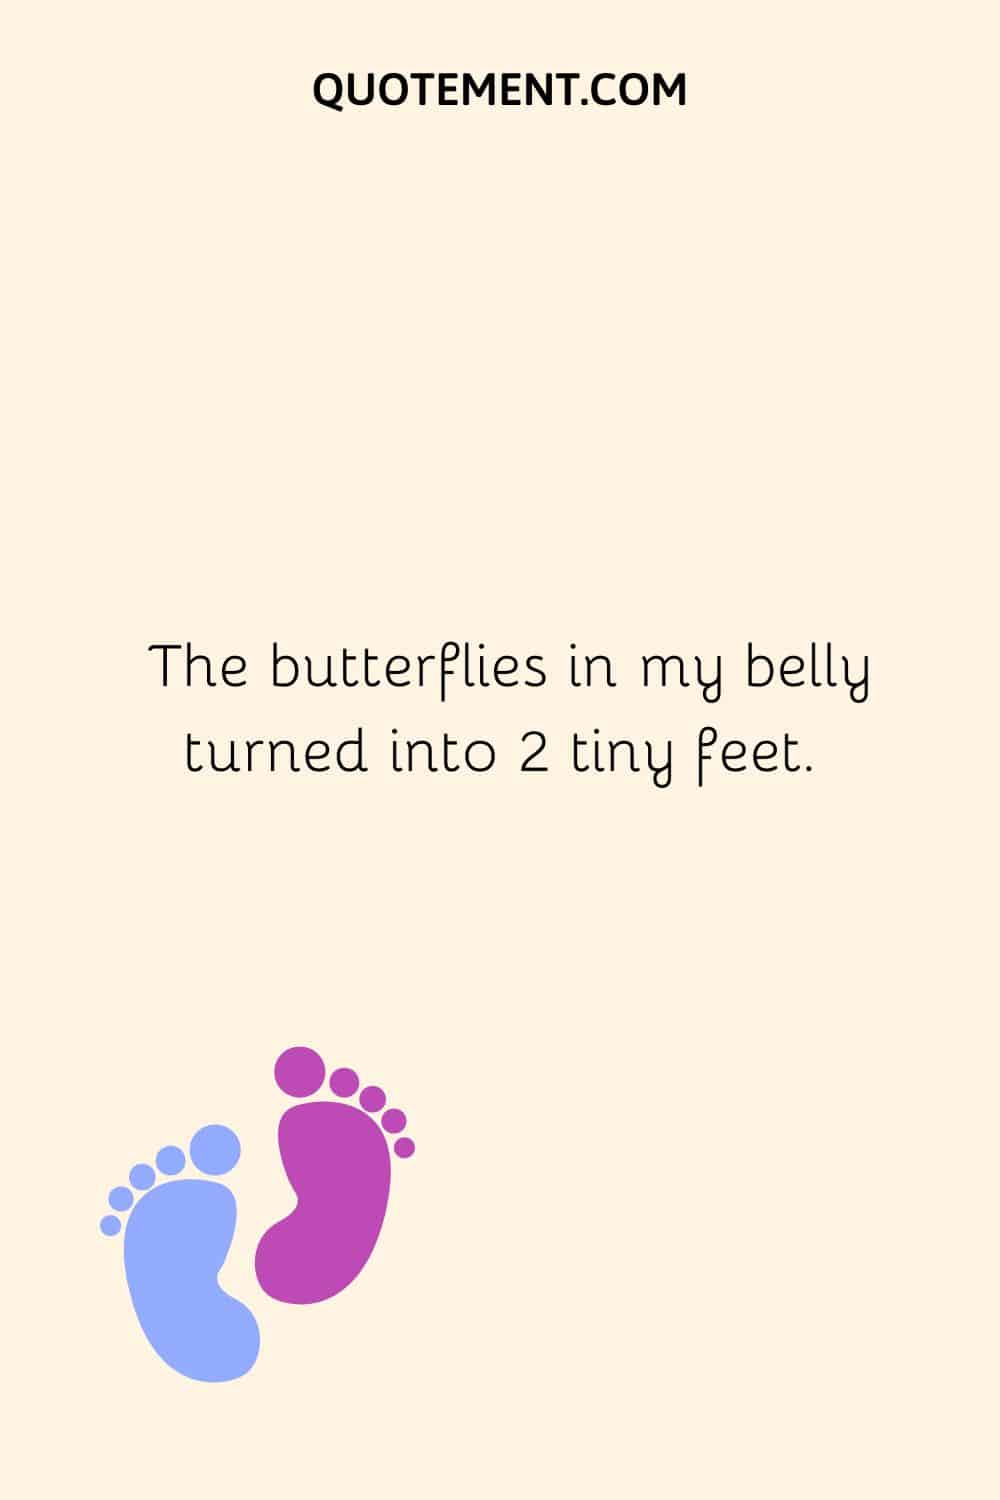 baby feet image representing creative baby birth announcement caption